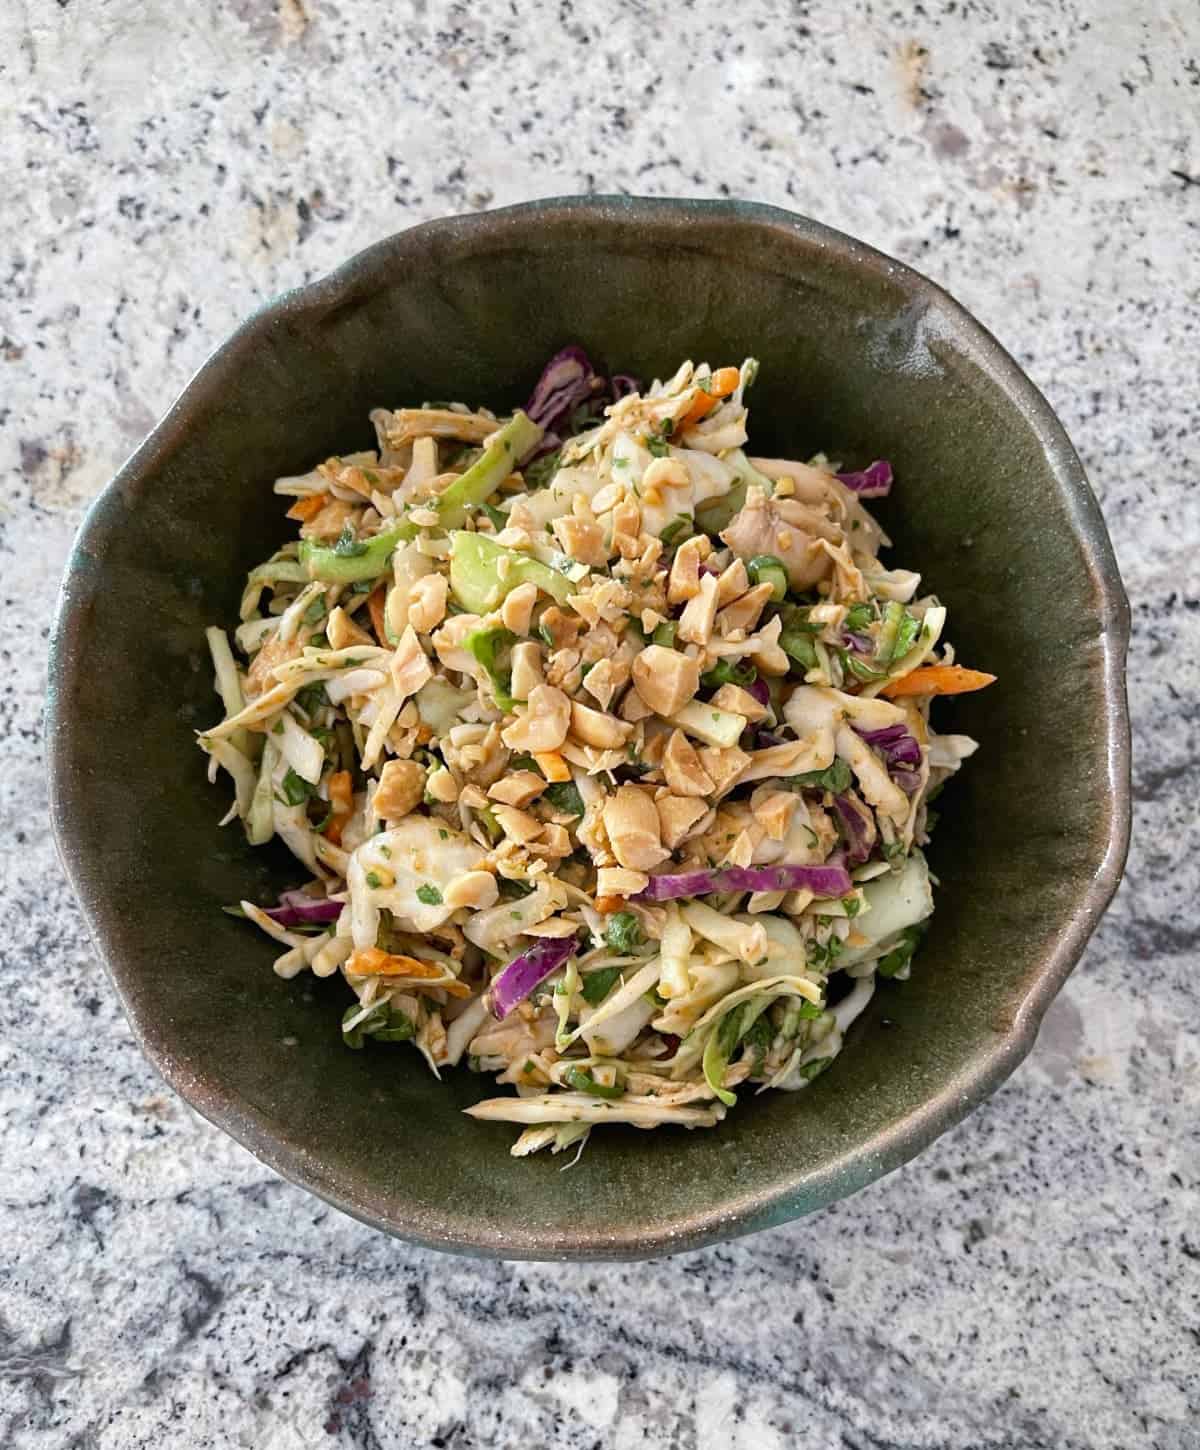 Fresh and crunchy Thai chicken coleslaw in a green ceramic bowl on a granite counter.